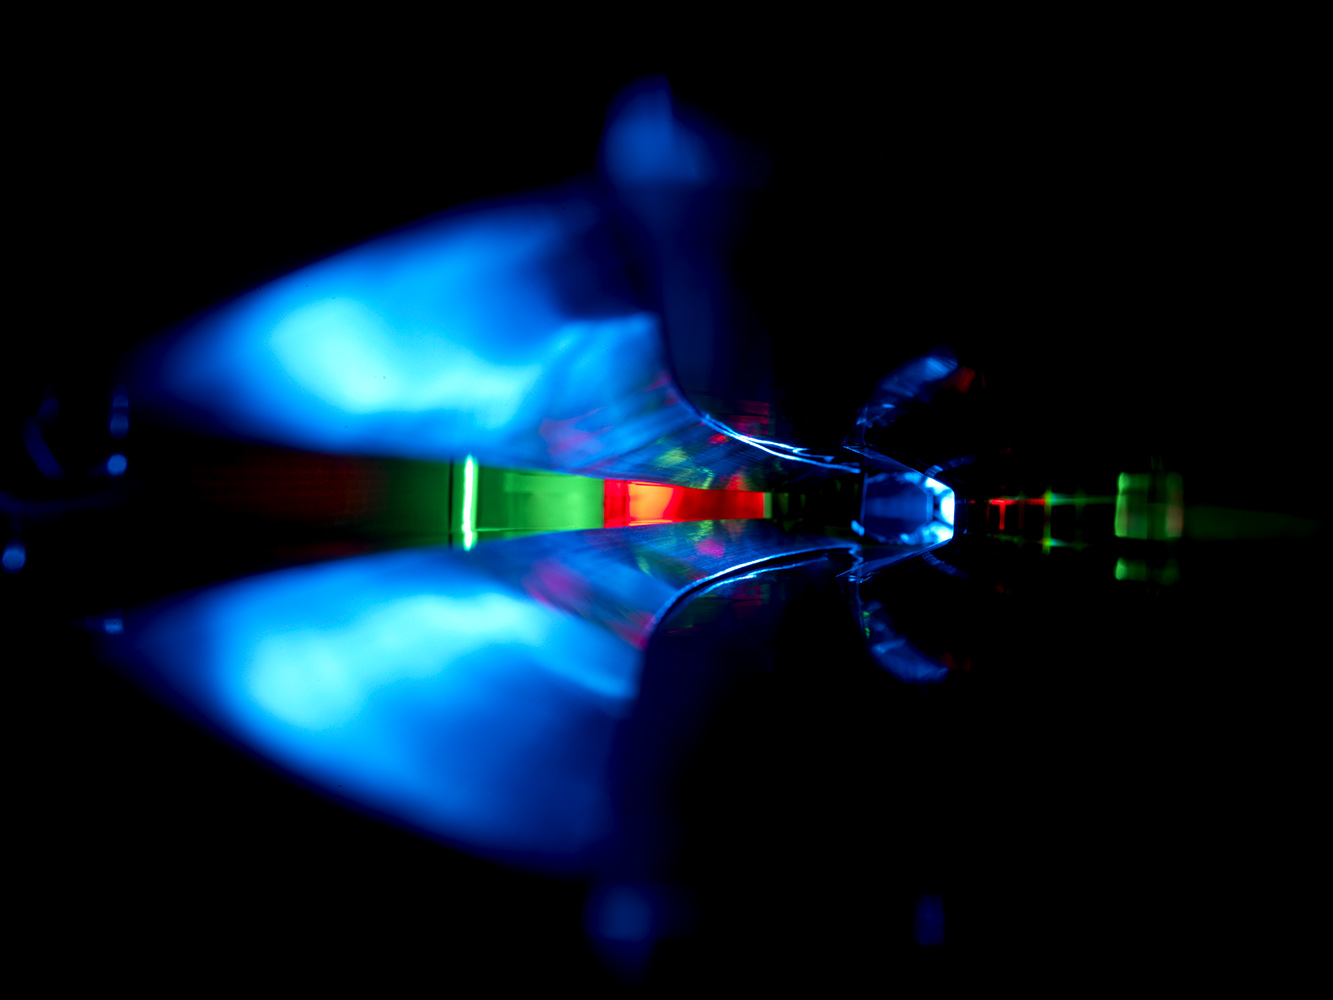 Inside a vacuum pipe, where electrons travel at nearly the speed of light, painted with light. Proving that science can be beautiful.